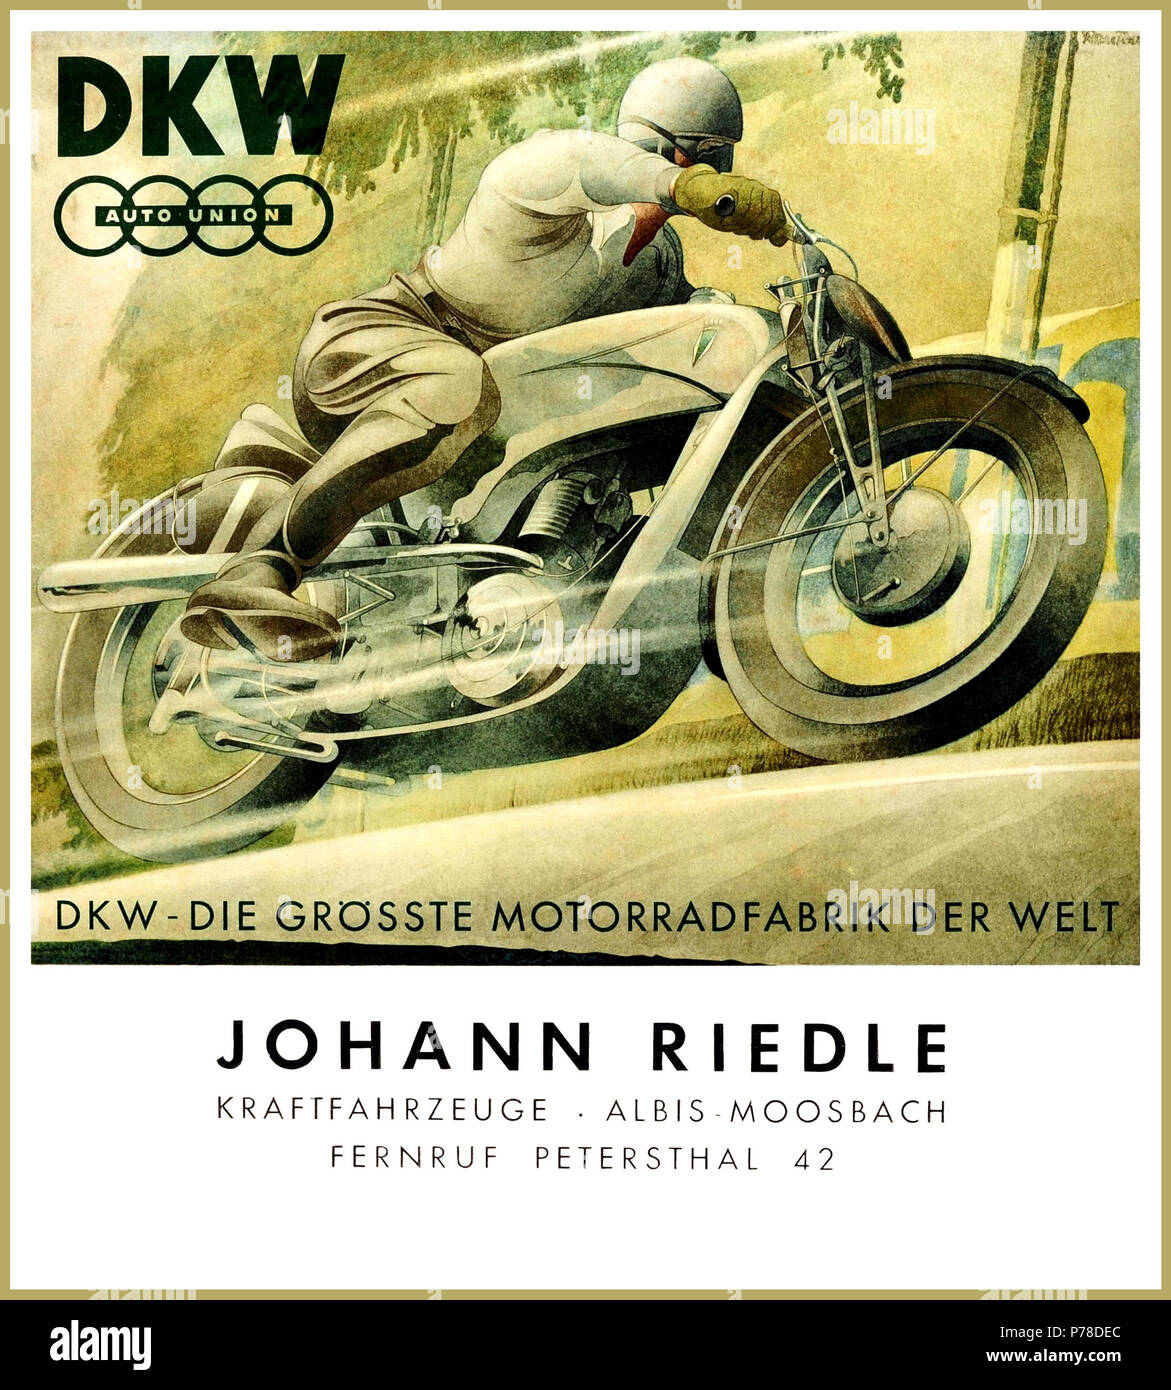 Original Vintage 1930s German Advertising Poster For DKW Auto Union Motorcycles, Stock Photo